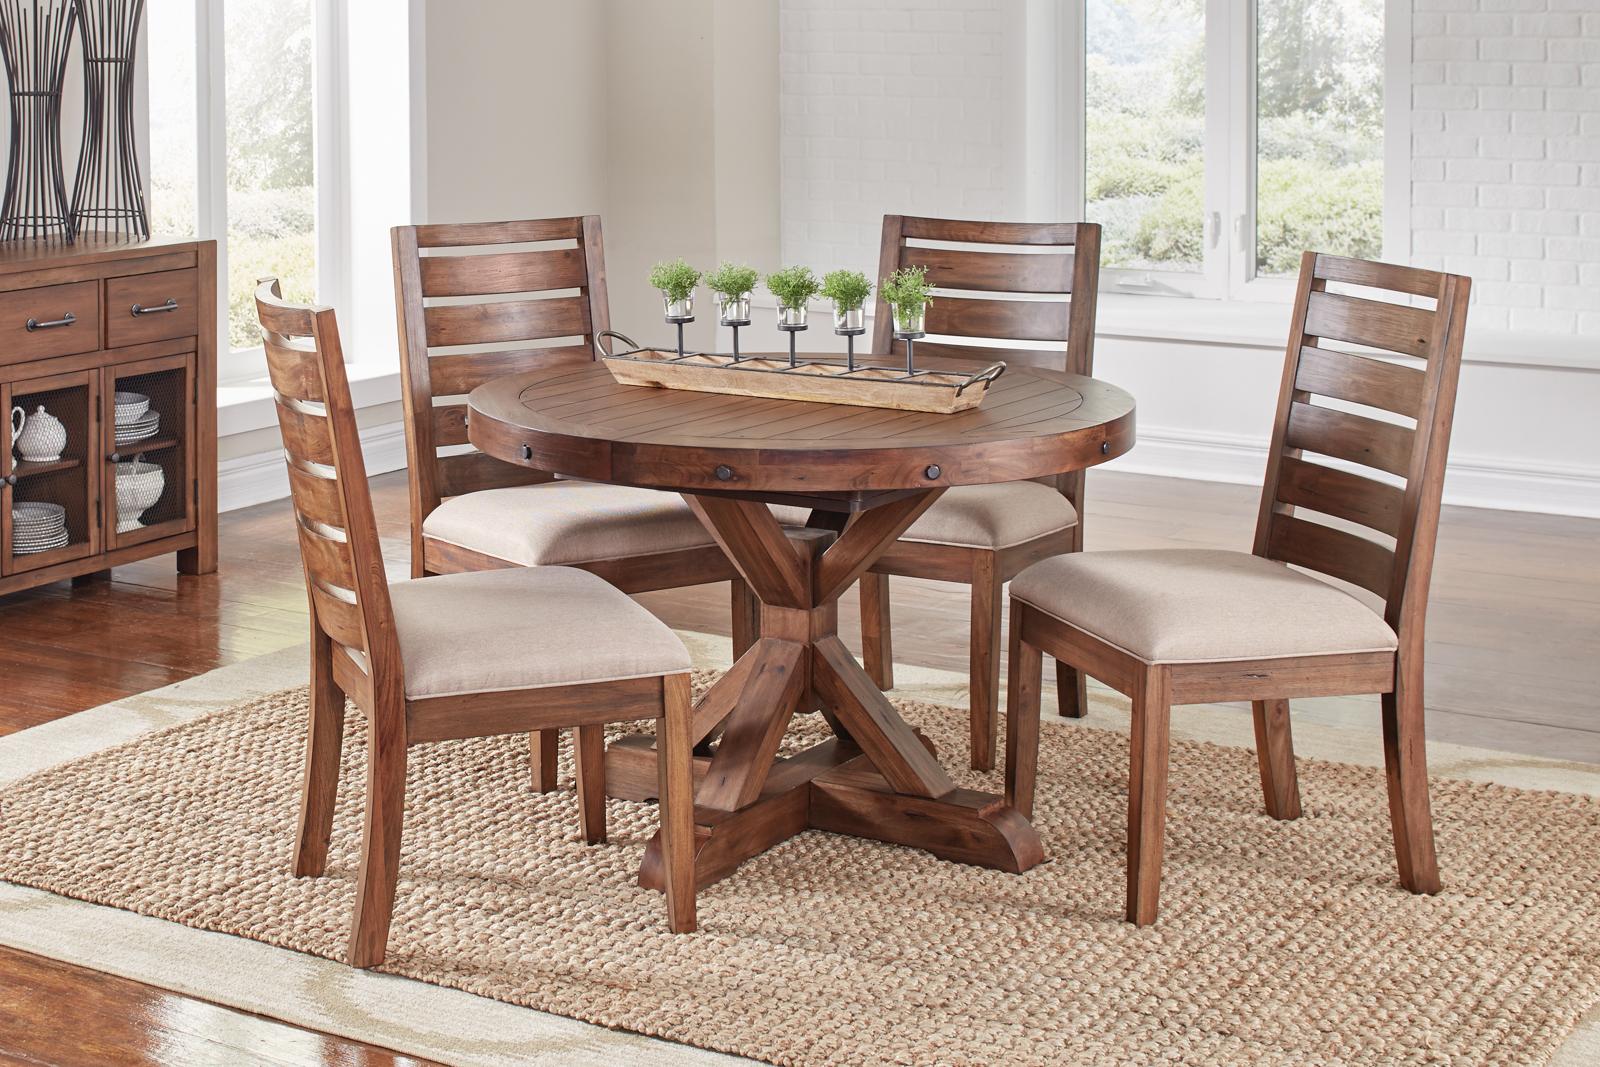 Rustic Dining Table Set Anacortes ANASM6200-Set-5 in Brown Fabric